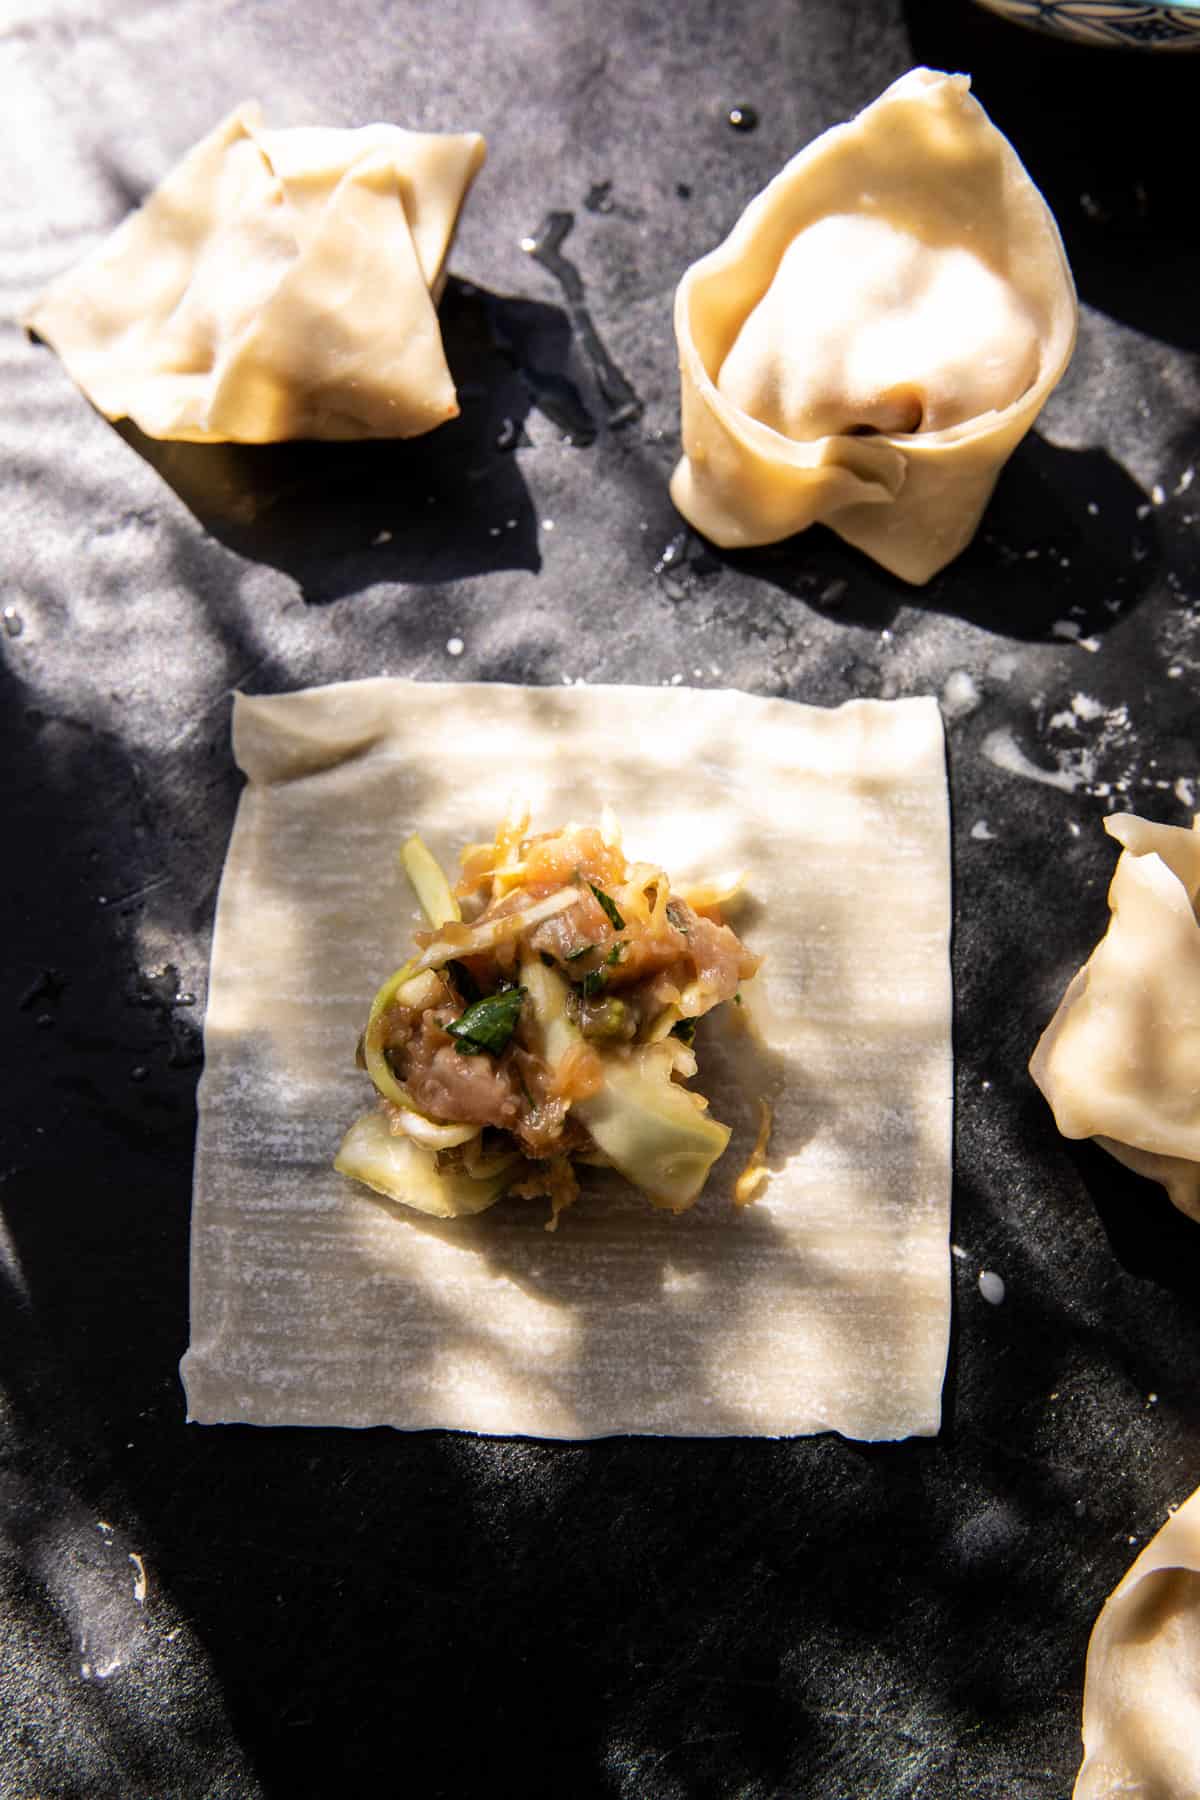 assembling and forming the wontons